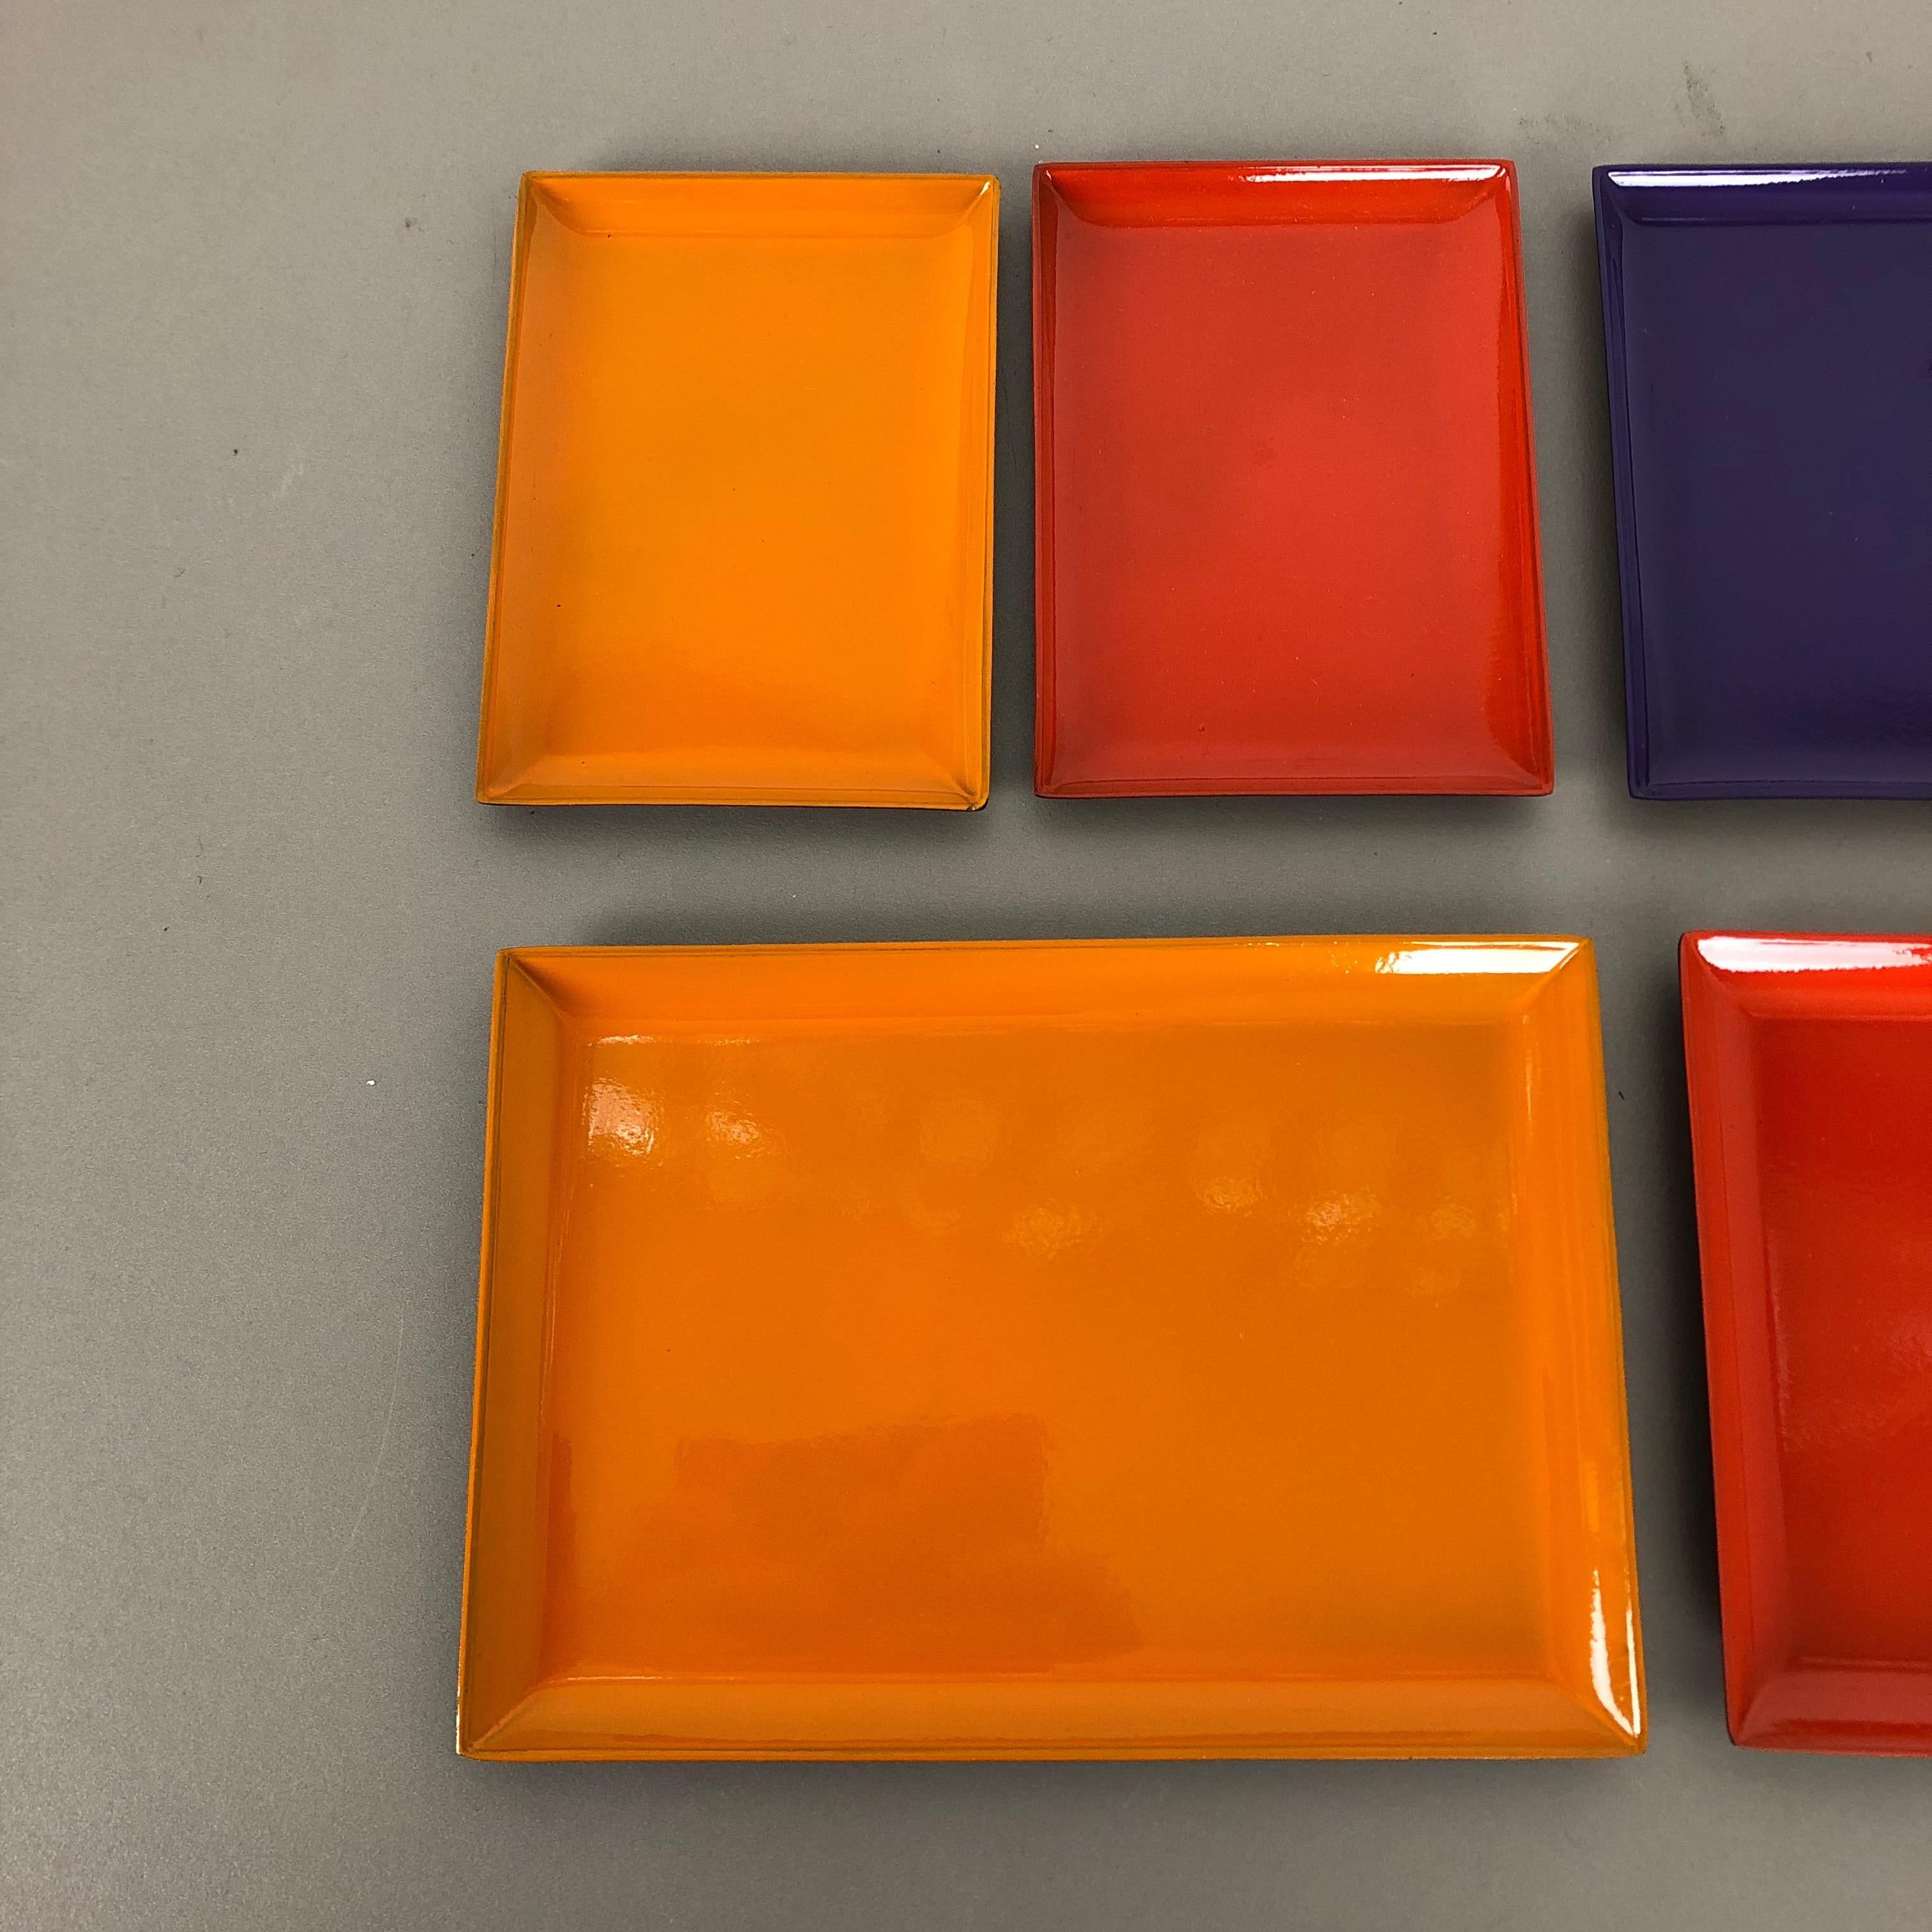 Swedish 1960s Set of Six Multi-Color Tray Elements Made in Sweden, Midcentury Modern